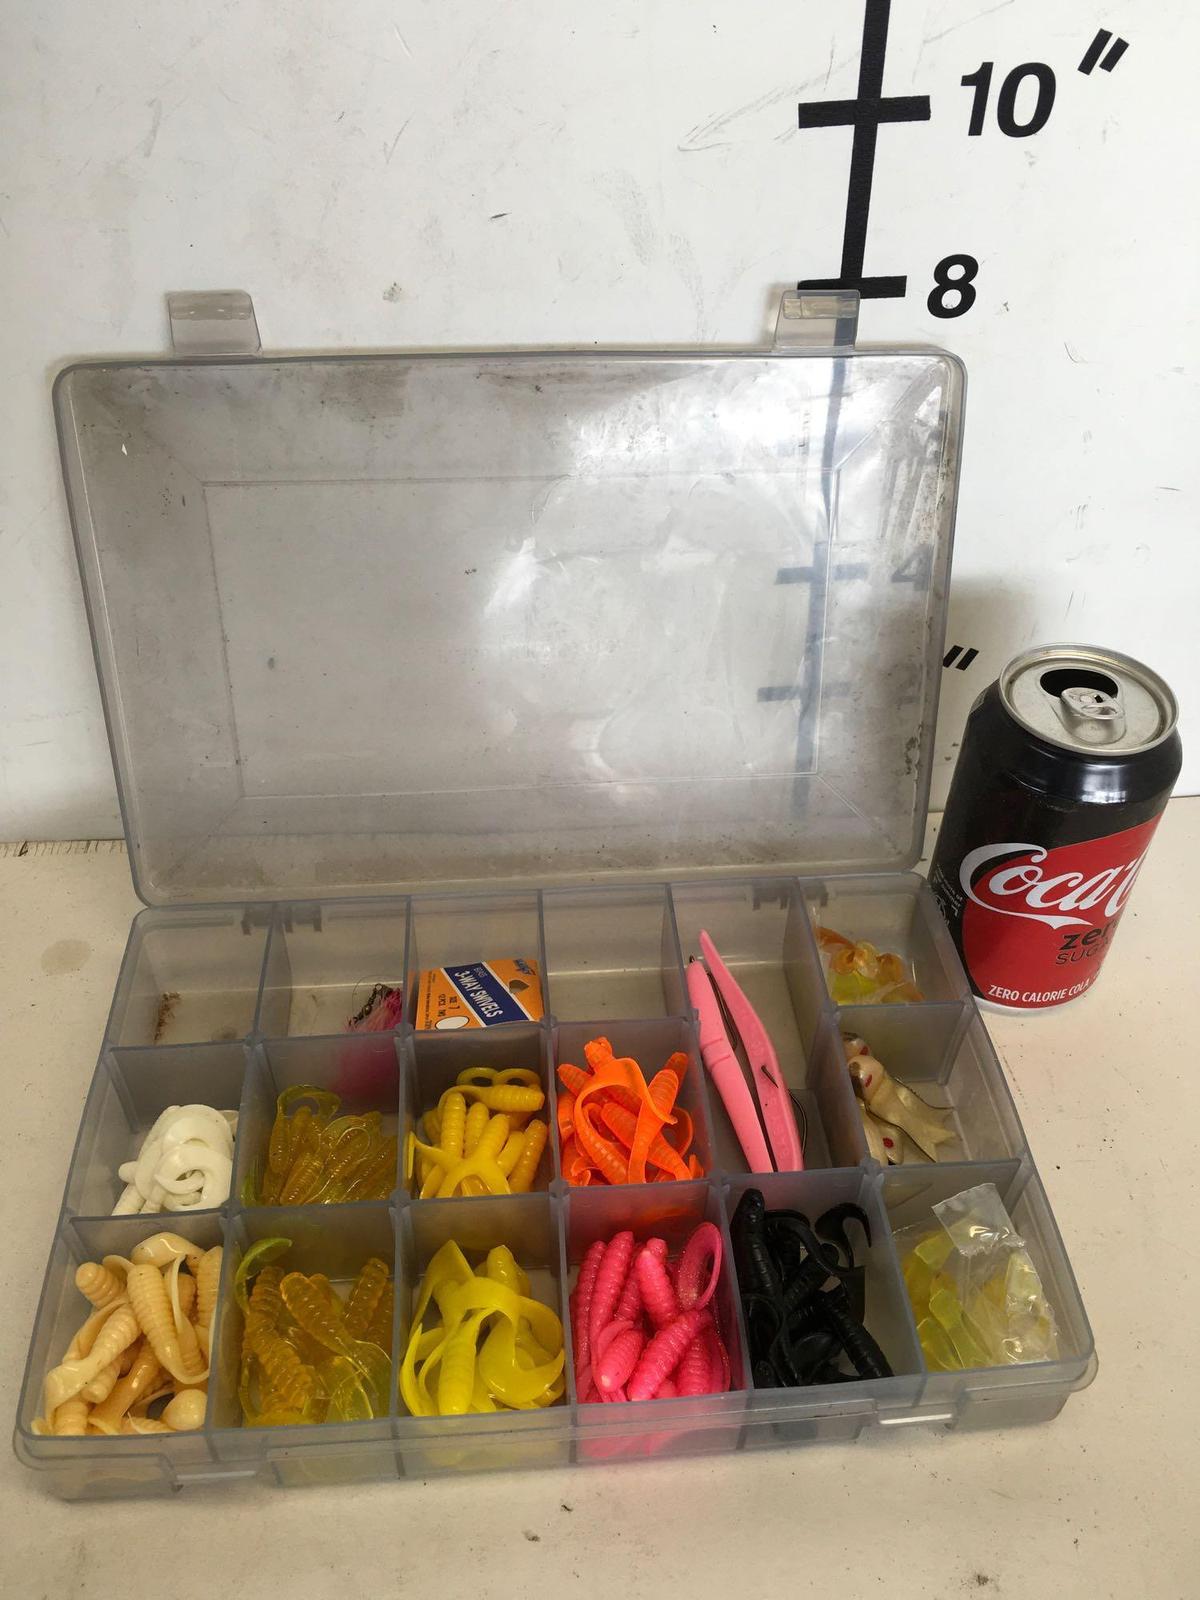 Plano tackle box and accessories